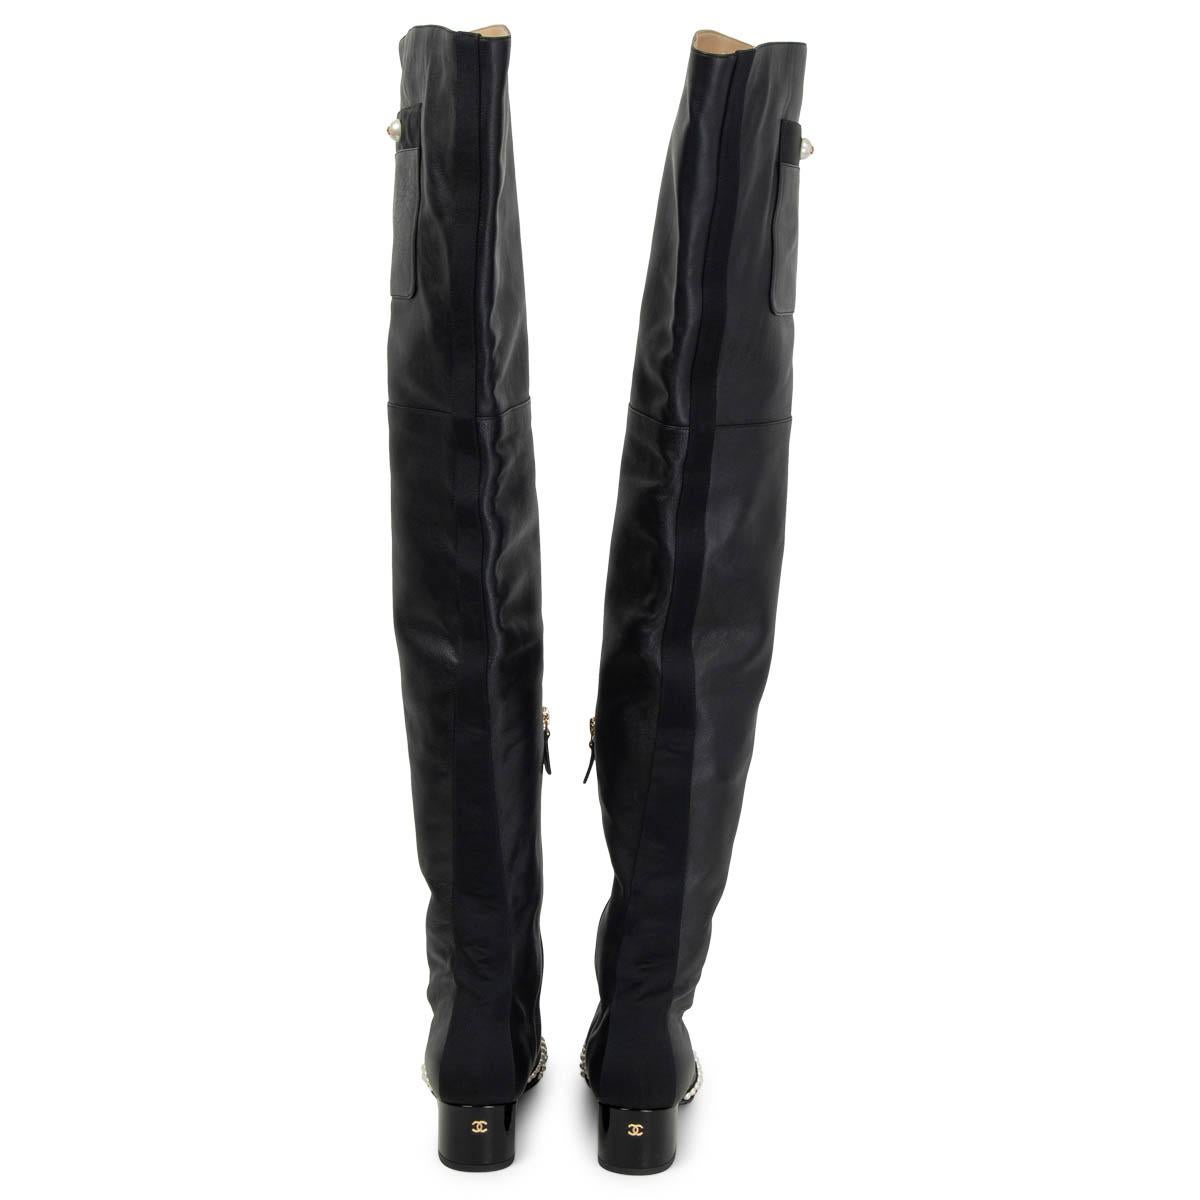 Black CHANEL black leather 2016 ROME PEARL OVER KNEE Boots Shoes 38.5 16A